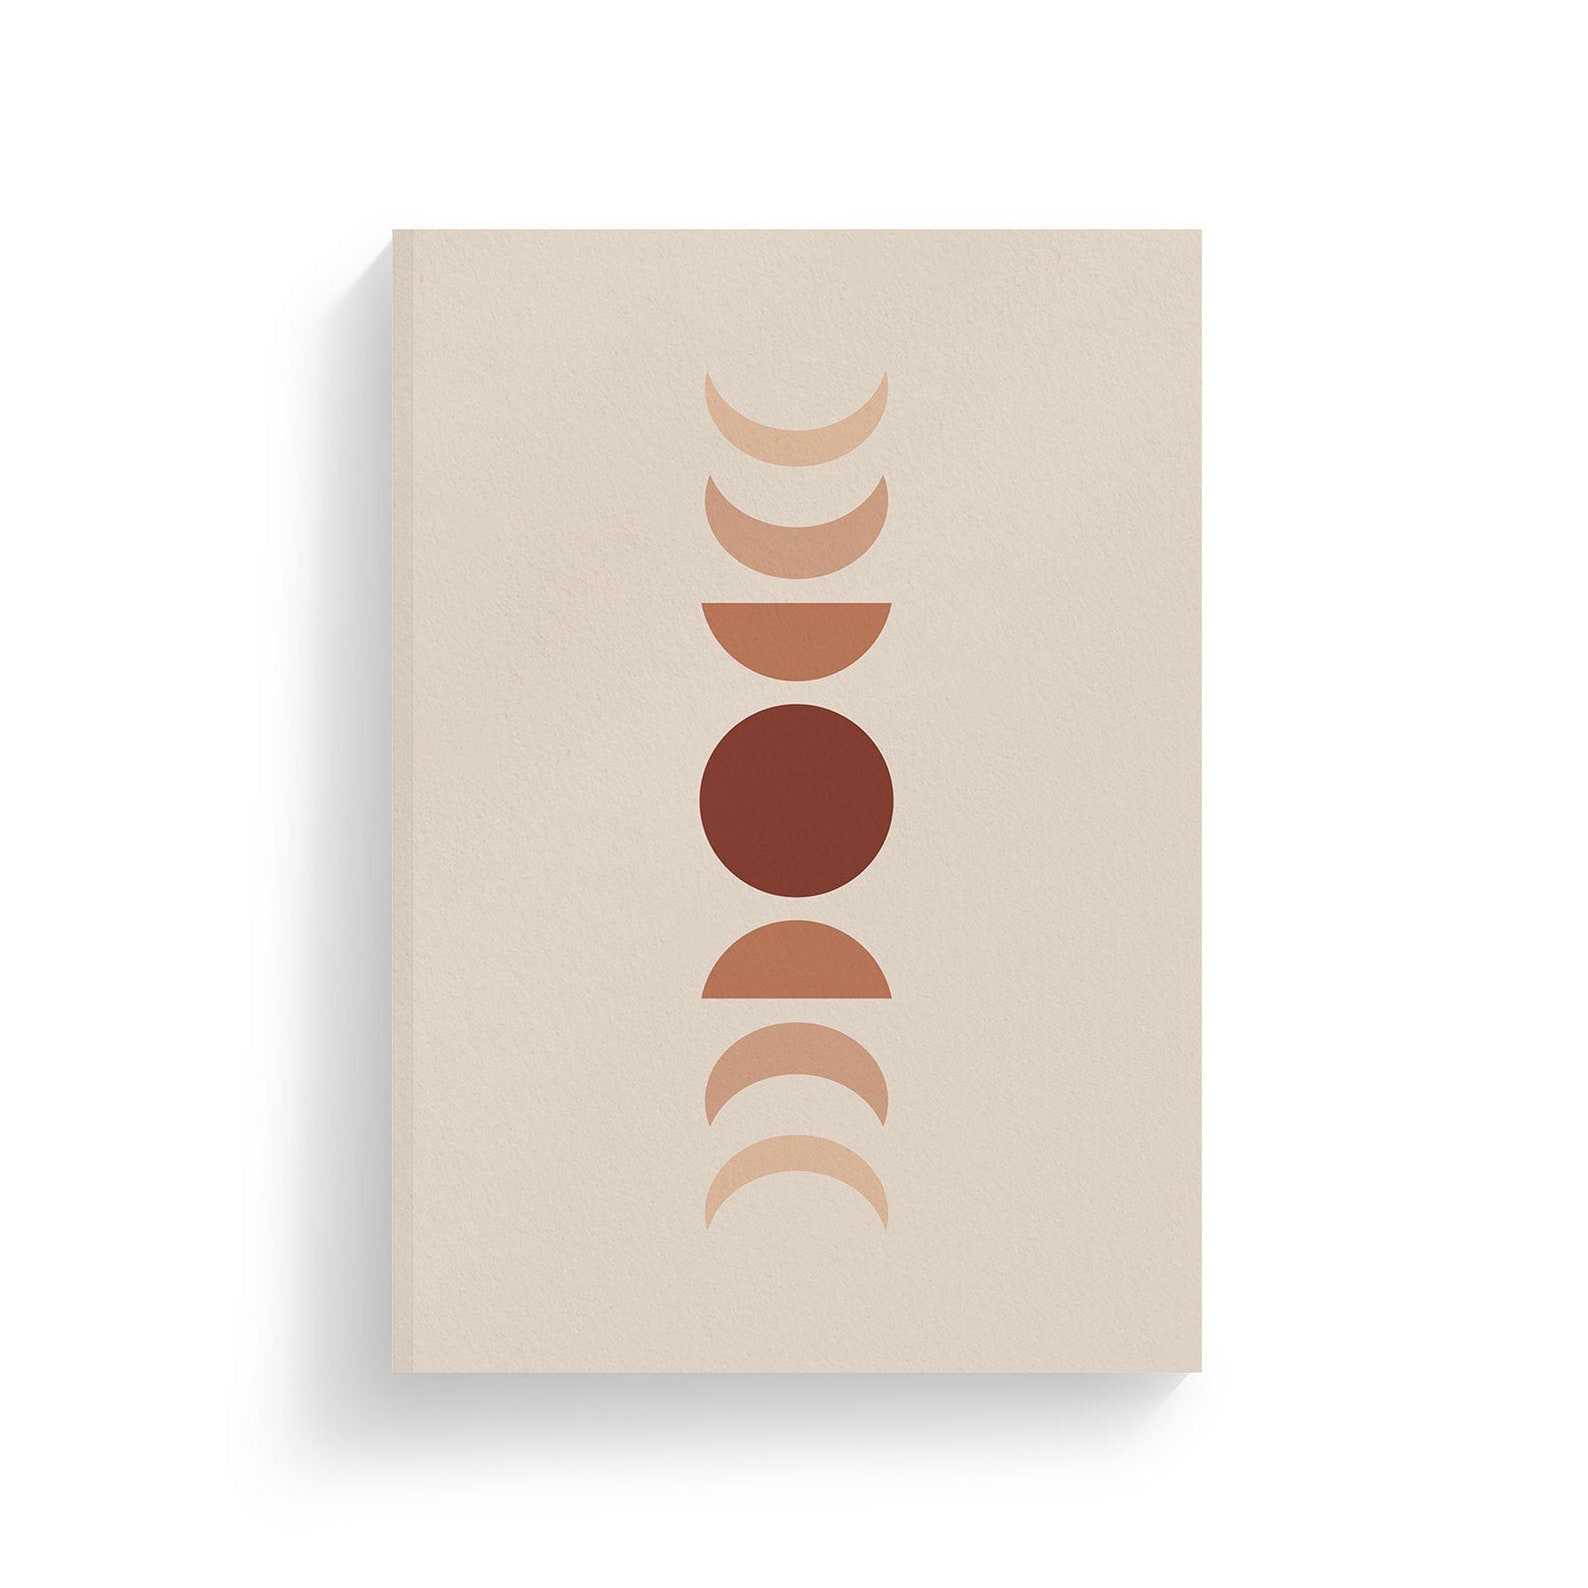 Cream colored notebook with red and orange moon phases down the center. 